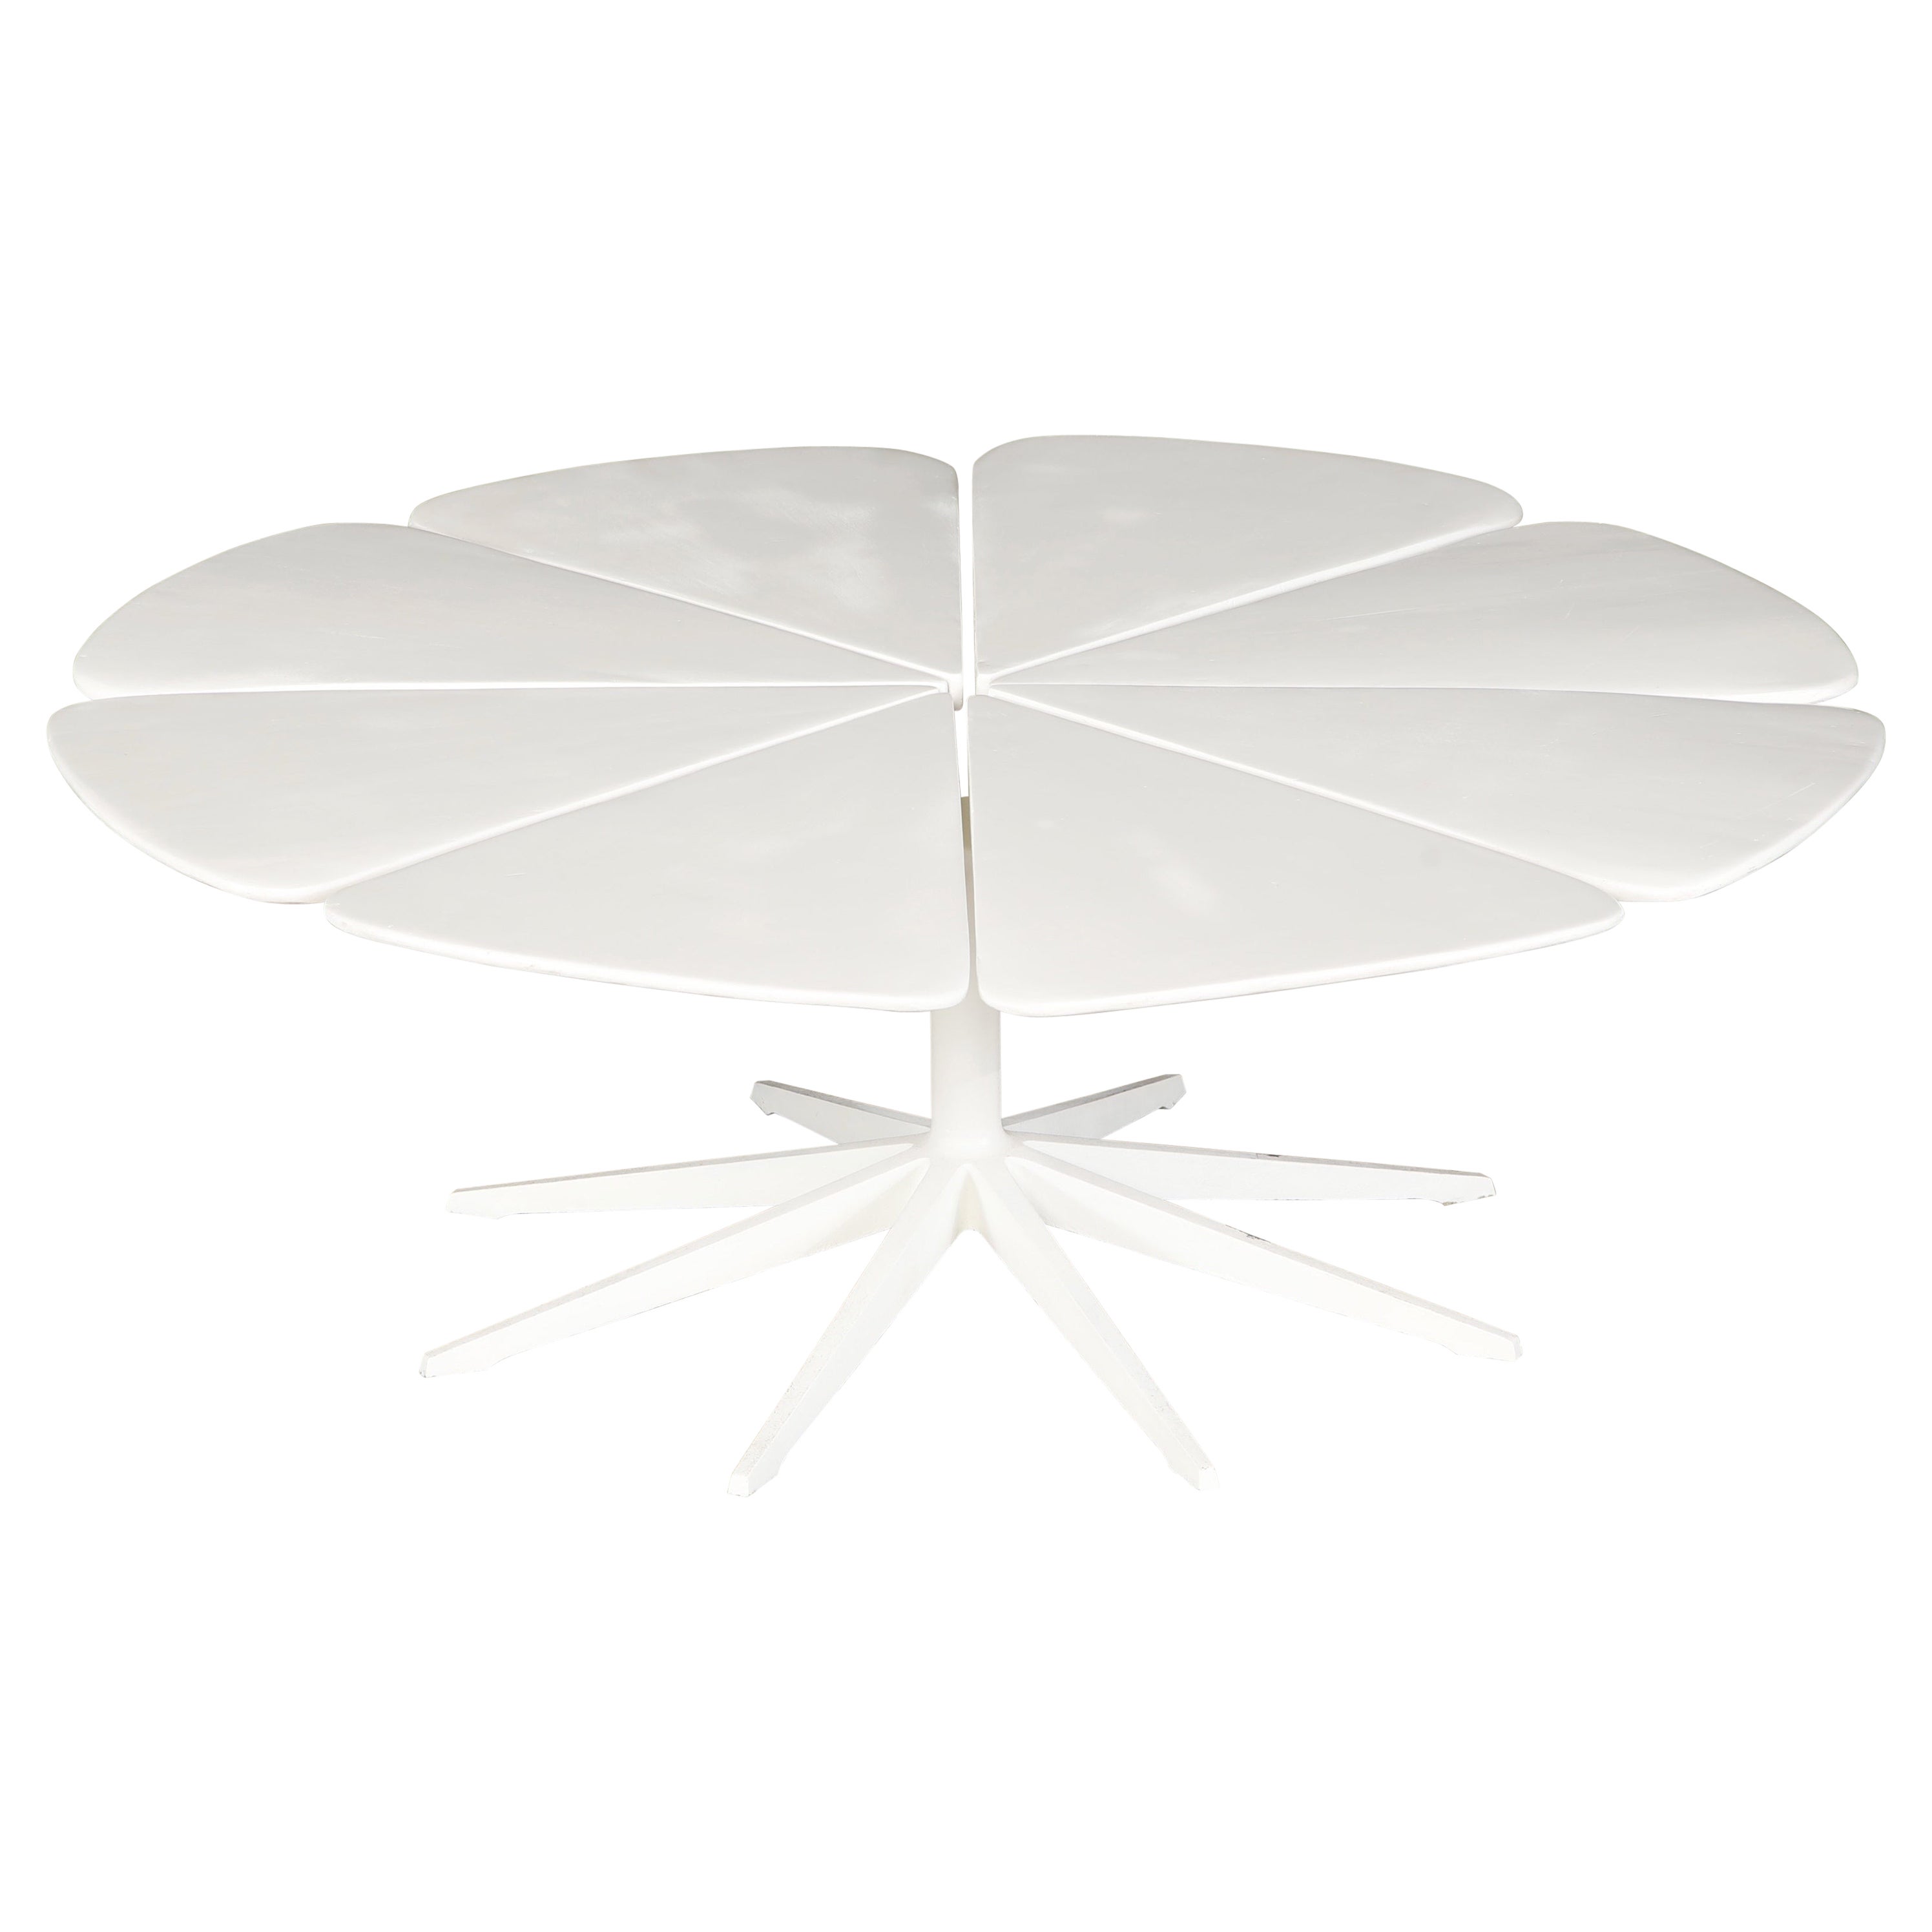 'Petal' Coffee Table by Richard Schultz for Knoll International, 1960 For Sale